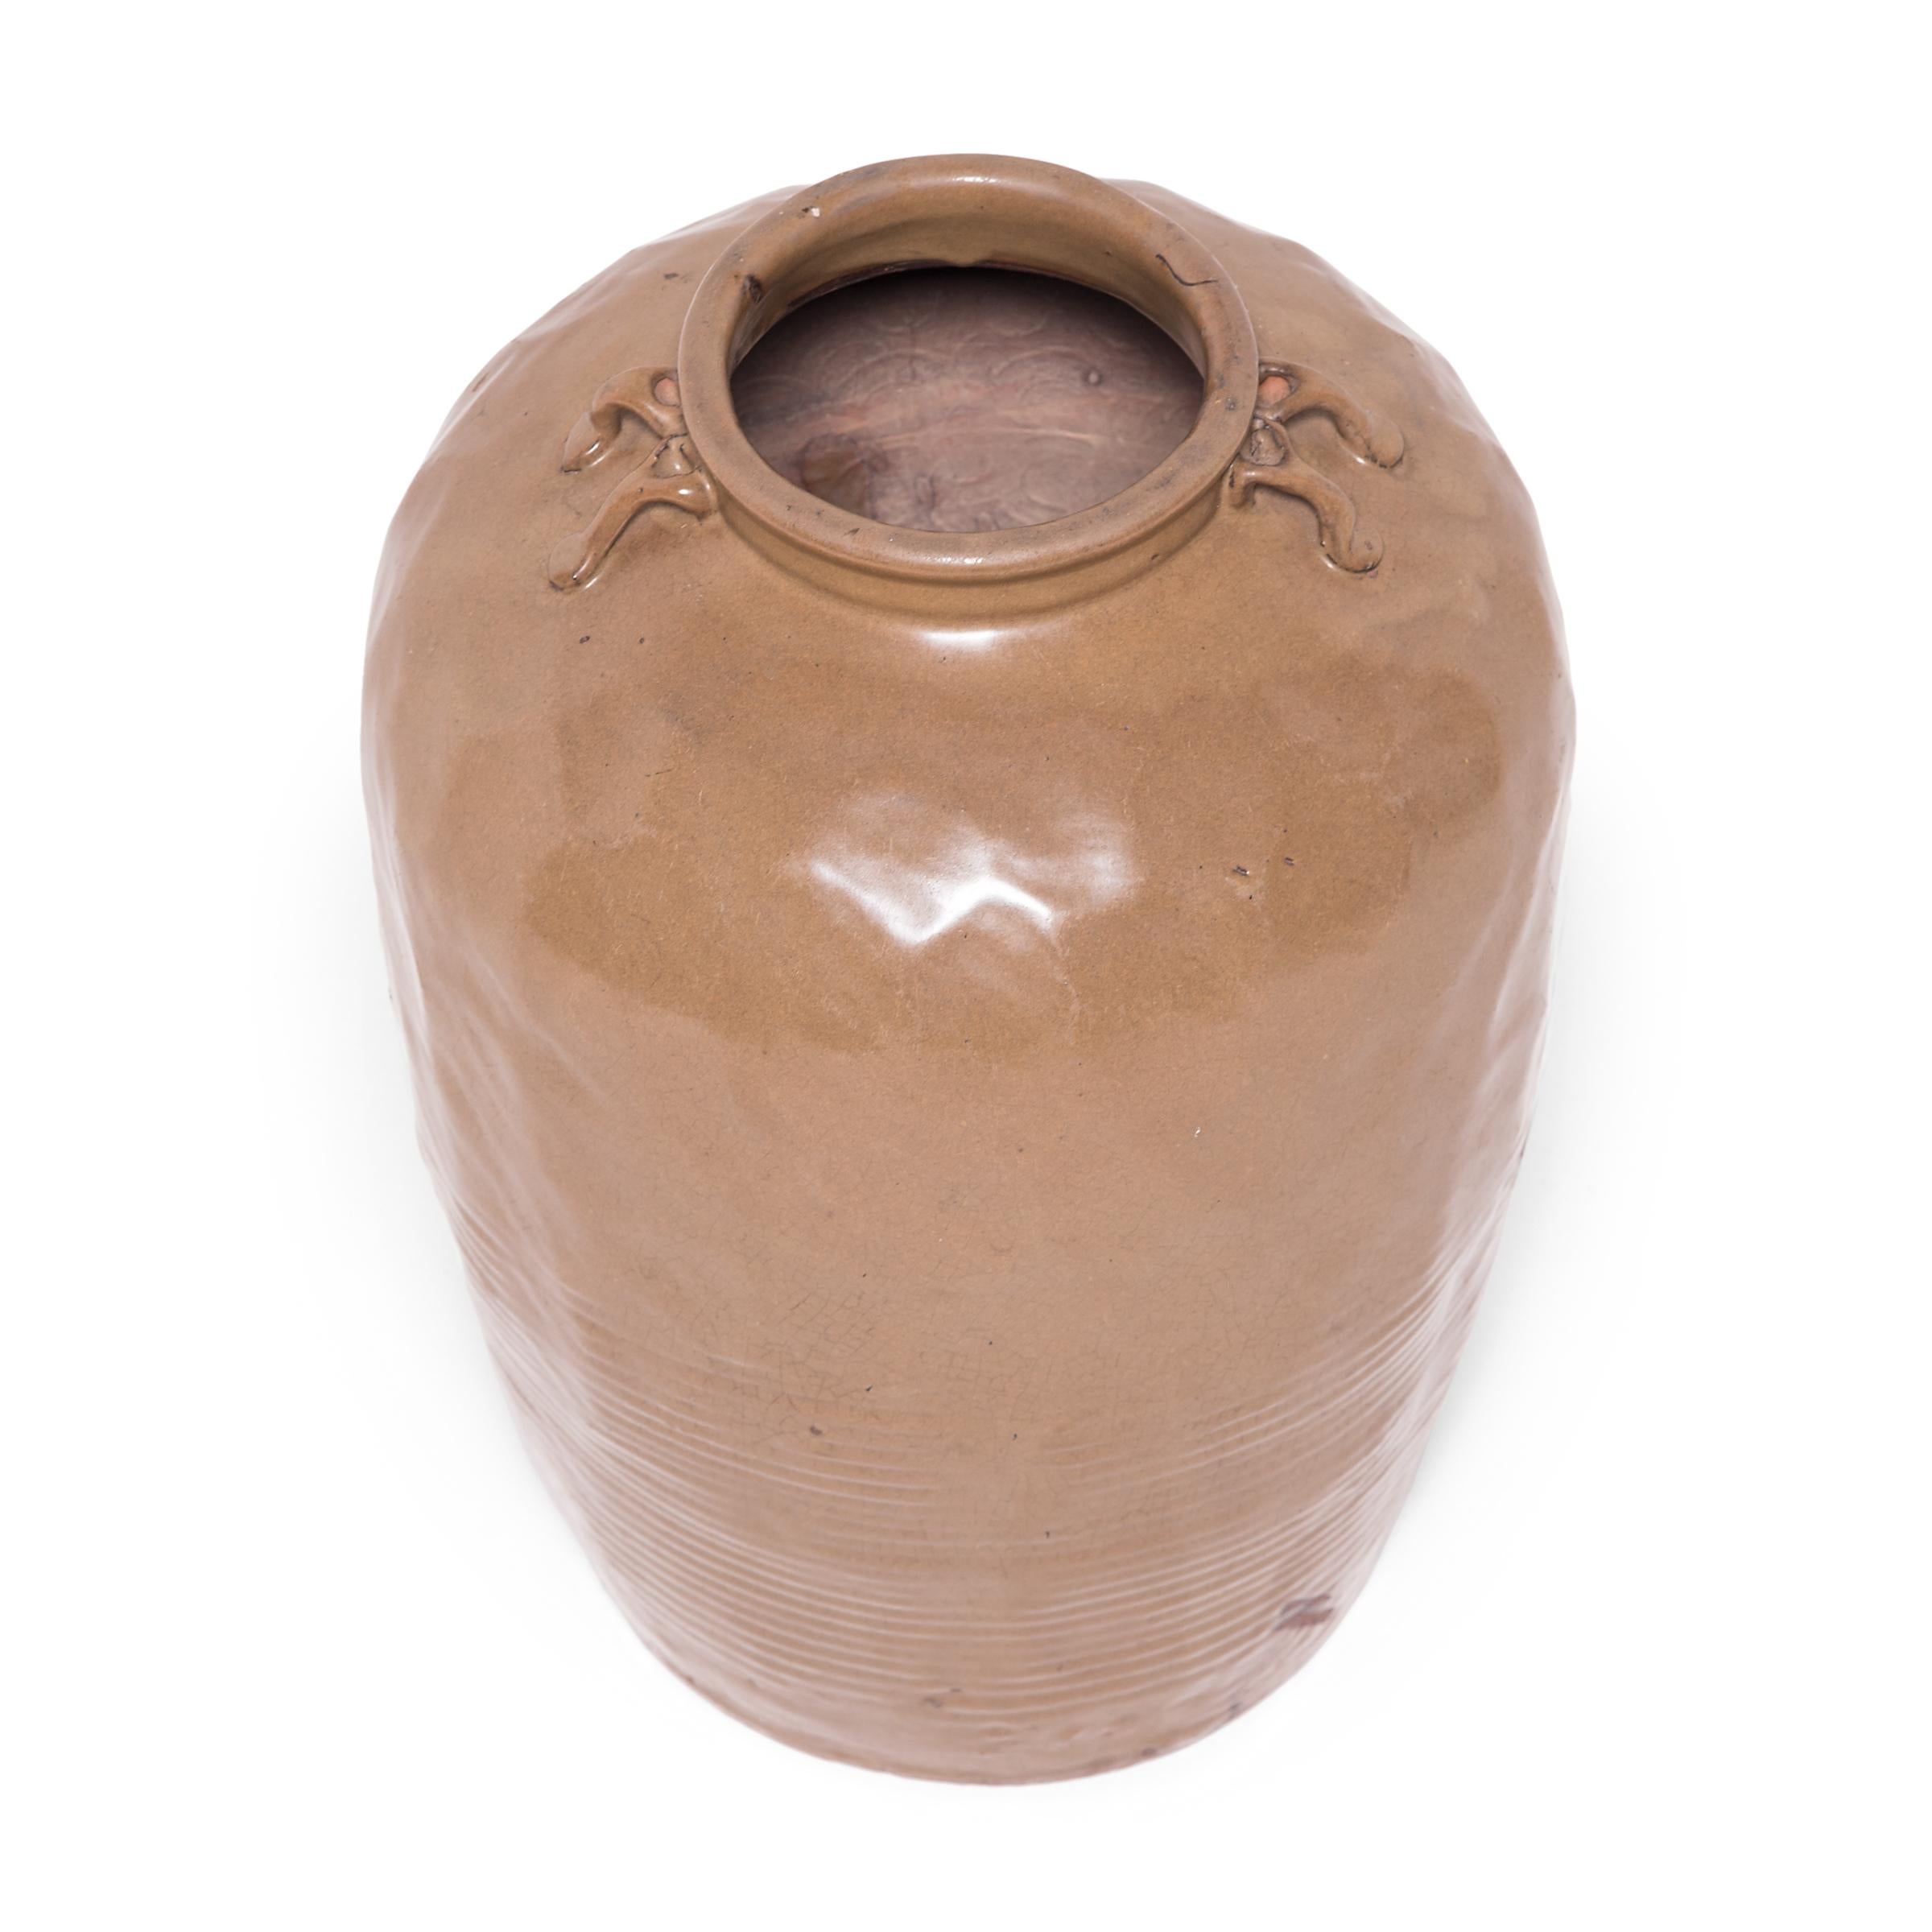 Rustic Chinese Glazed Stoneware Jar, c. 1850 For Sale